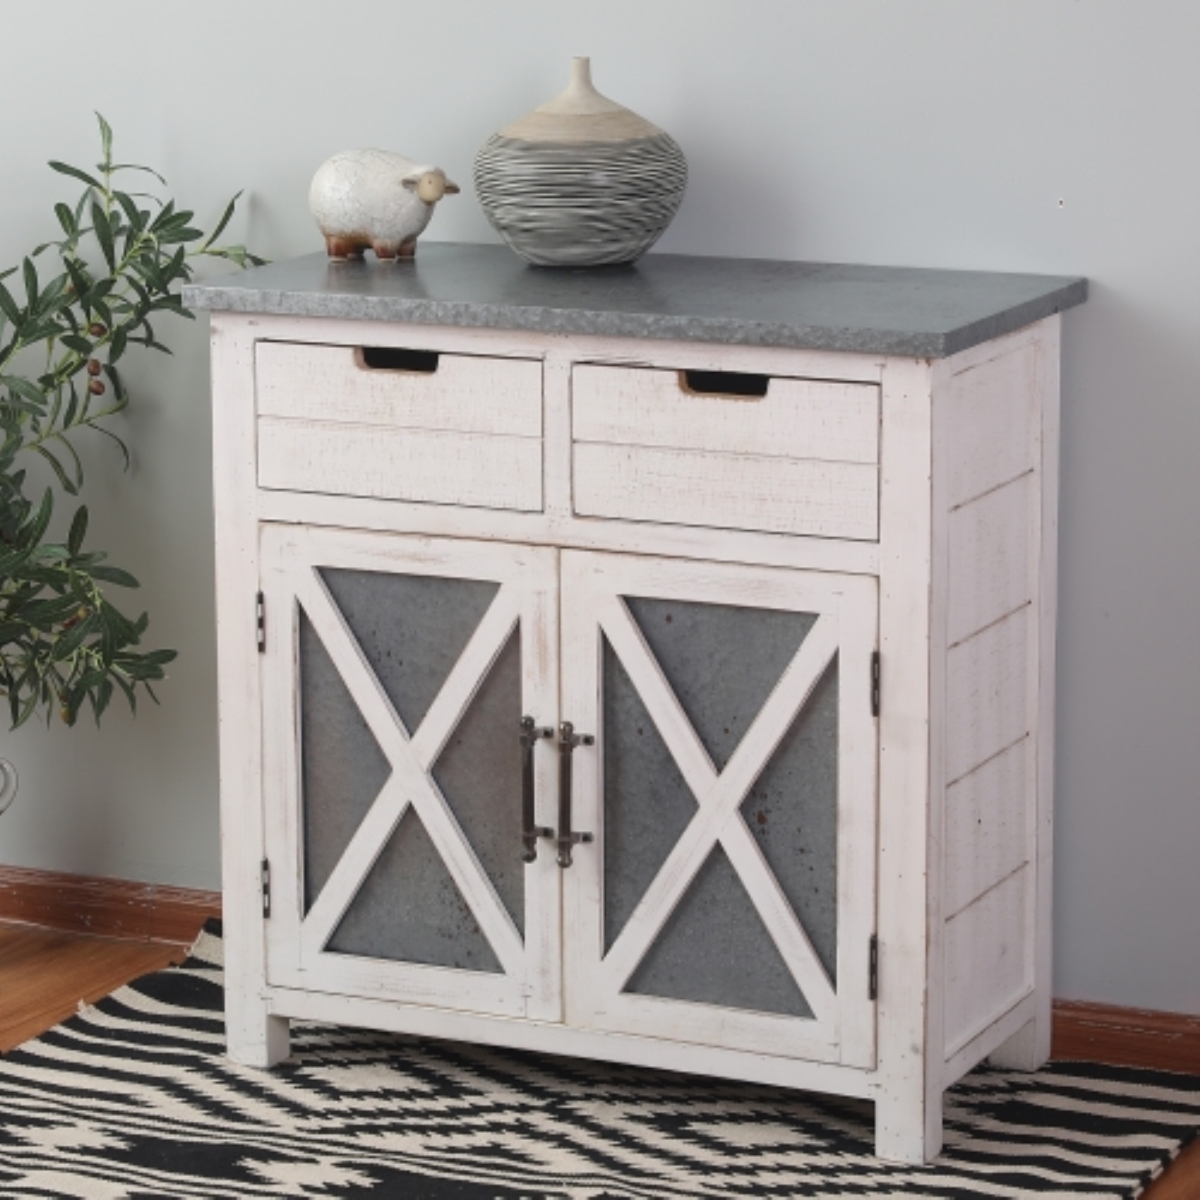 Luxen Home Whif354 Wood Console Cabinet - White